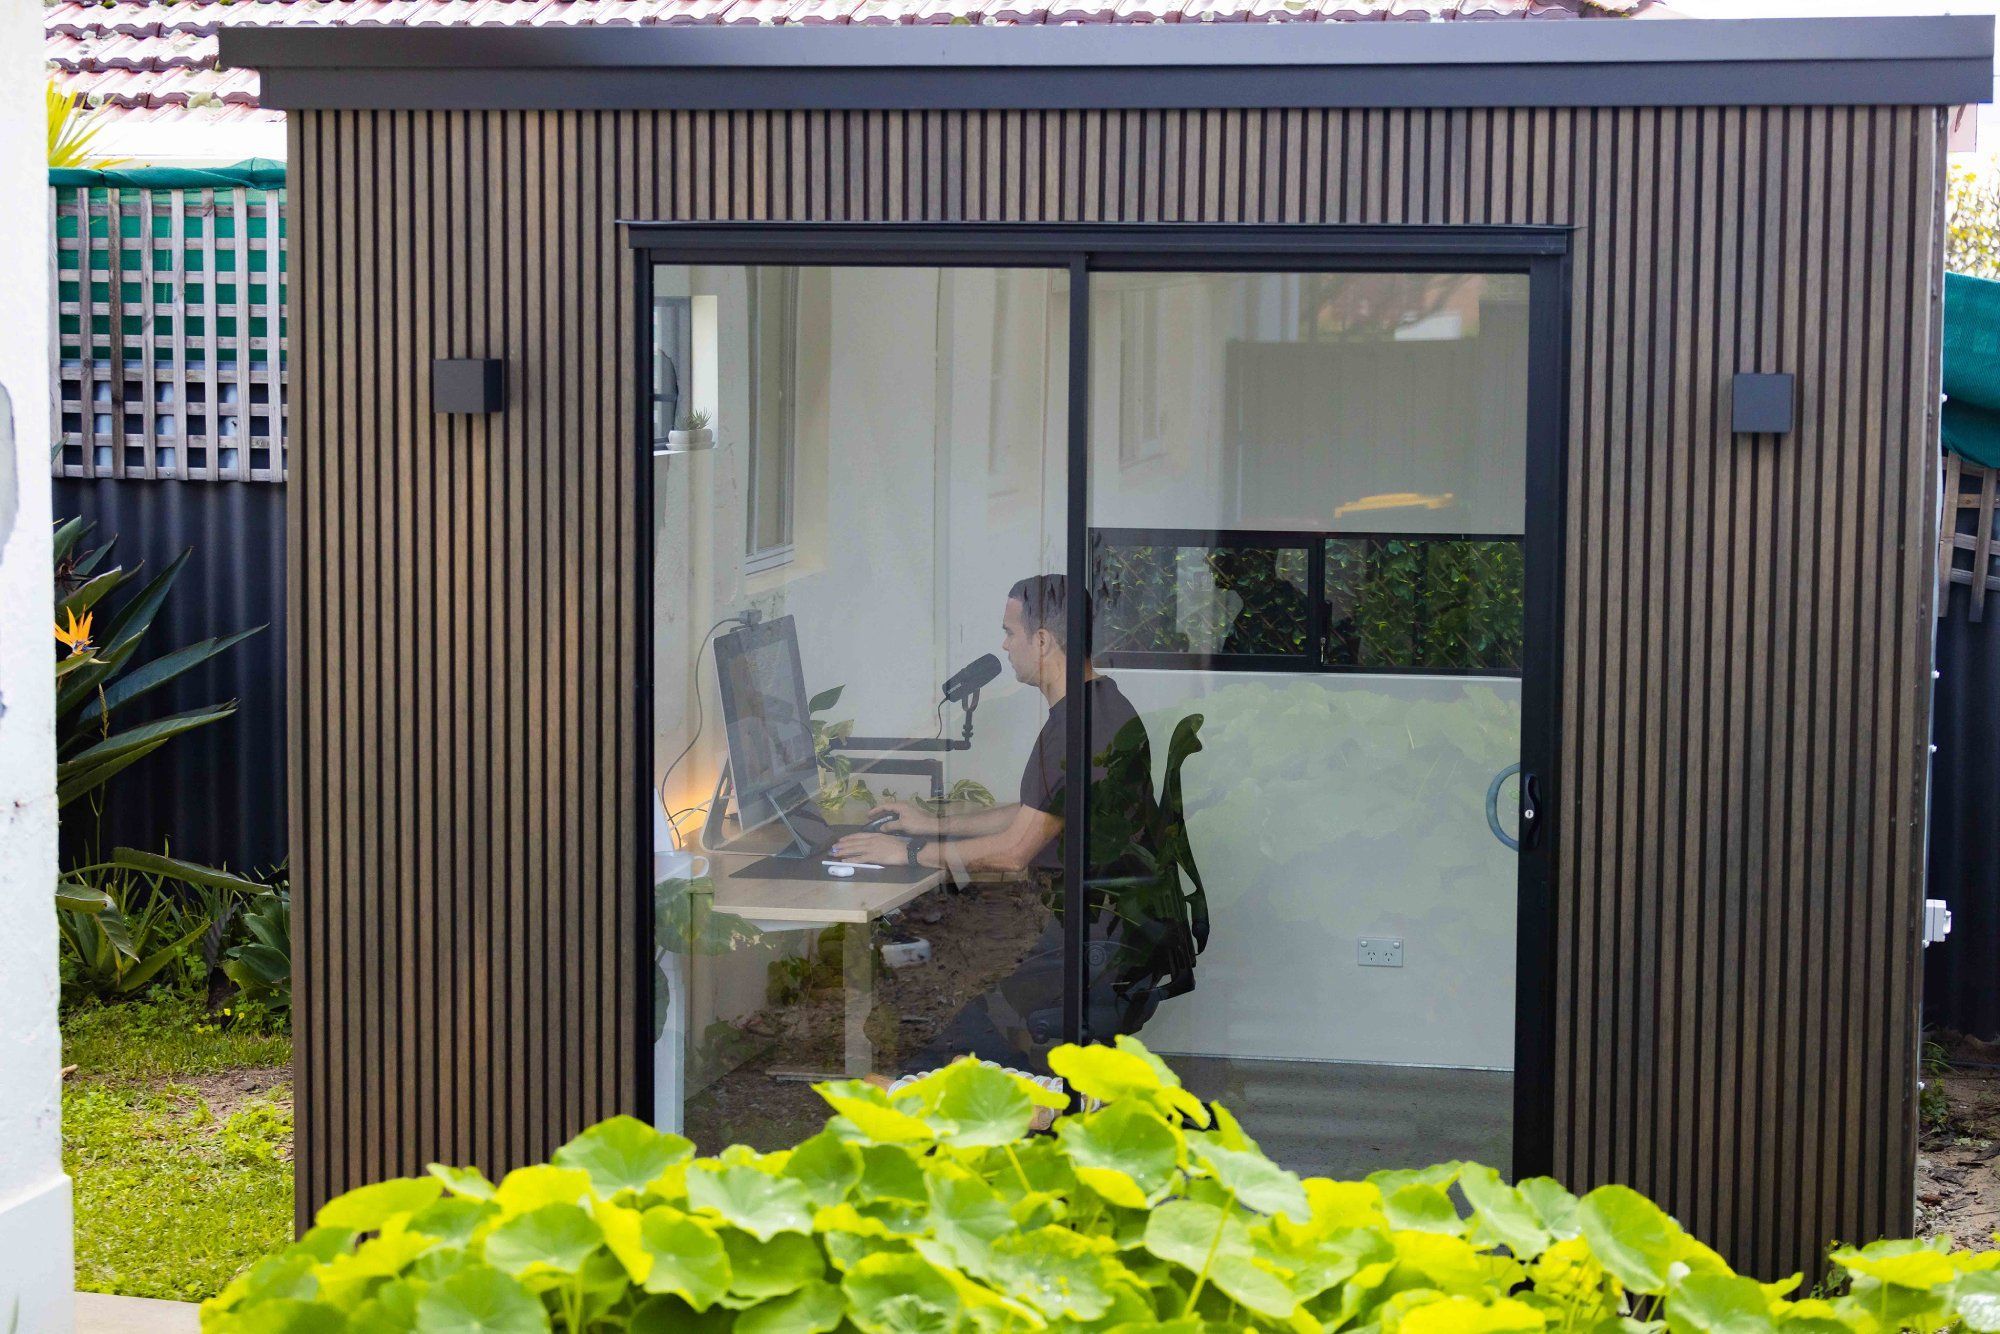 A person sits at a desk inside a modern garden office pod with large glass doors, visible through the glass from the lush greenery outside. The office has a contemporary design with wooden slat walls and a flat roof